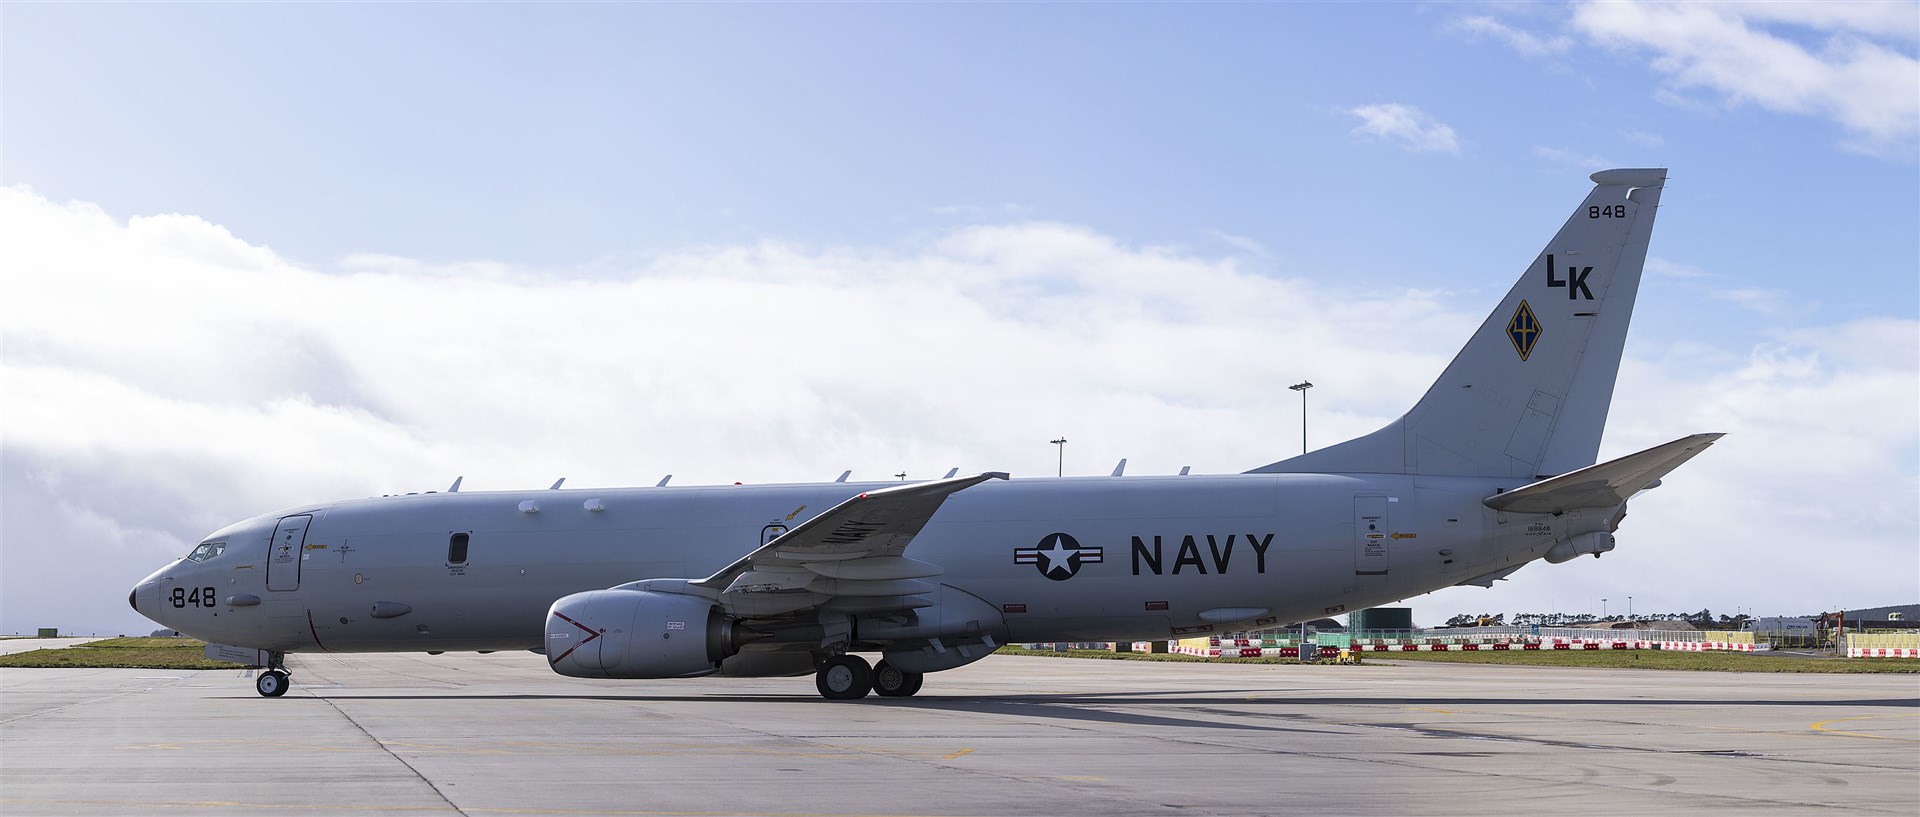 A visiting P-8A Poseidon Maritime Patrol Aircraft operated by the United States Navy. This was captured on a recent stop-over at RAF Lossiemouth. The Royal Air Force will receive nine of these aircraft, with the first ready around October 2019, and arriving in the UK in early 2020.